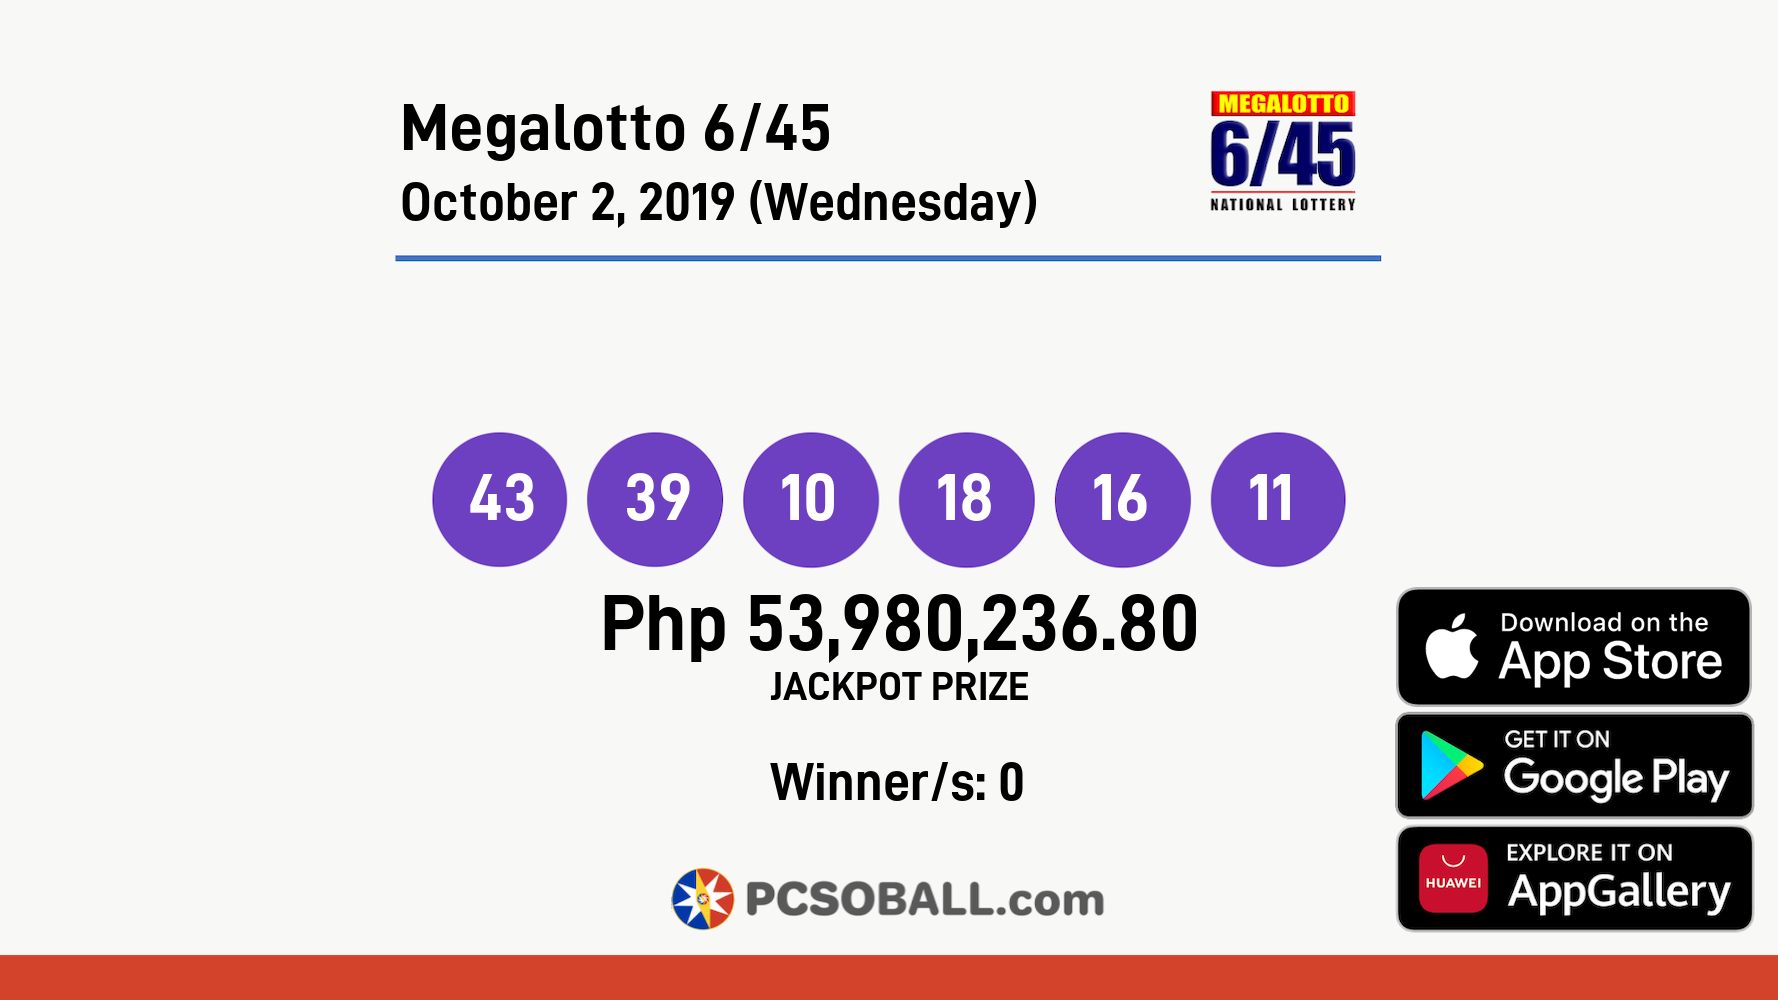 Megalotto 6/45 October 2, 2019 (Wednesday) Result